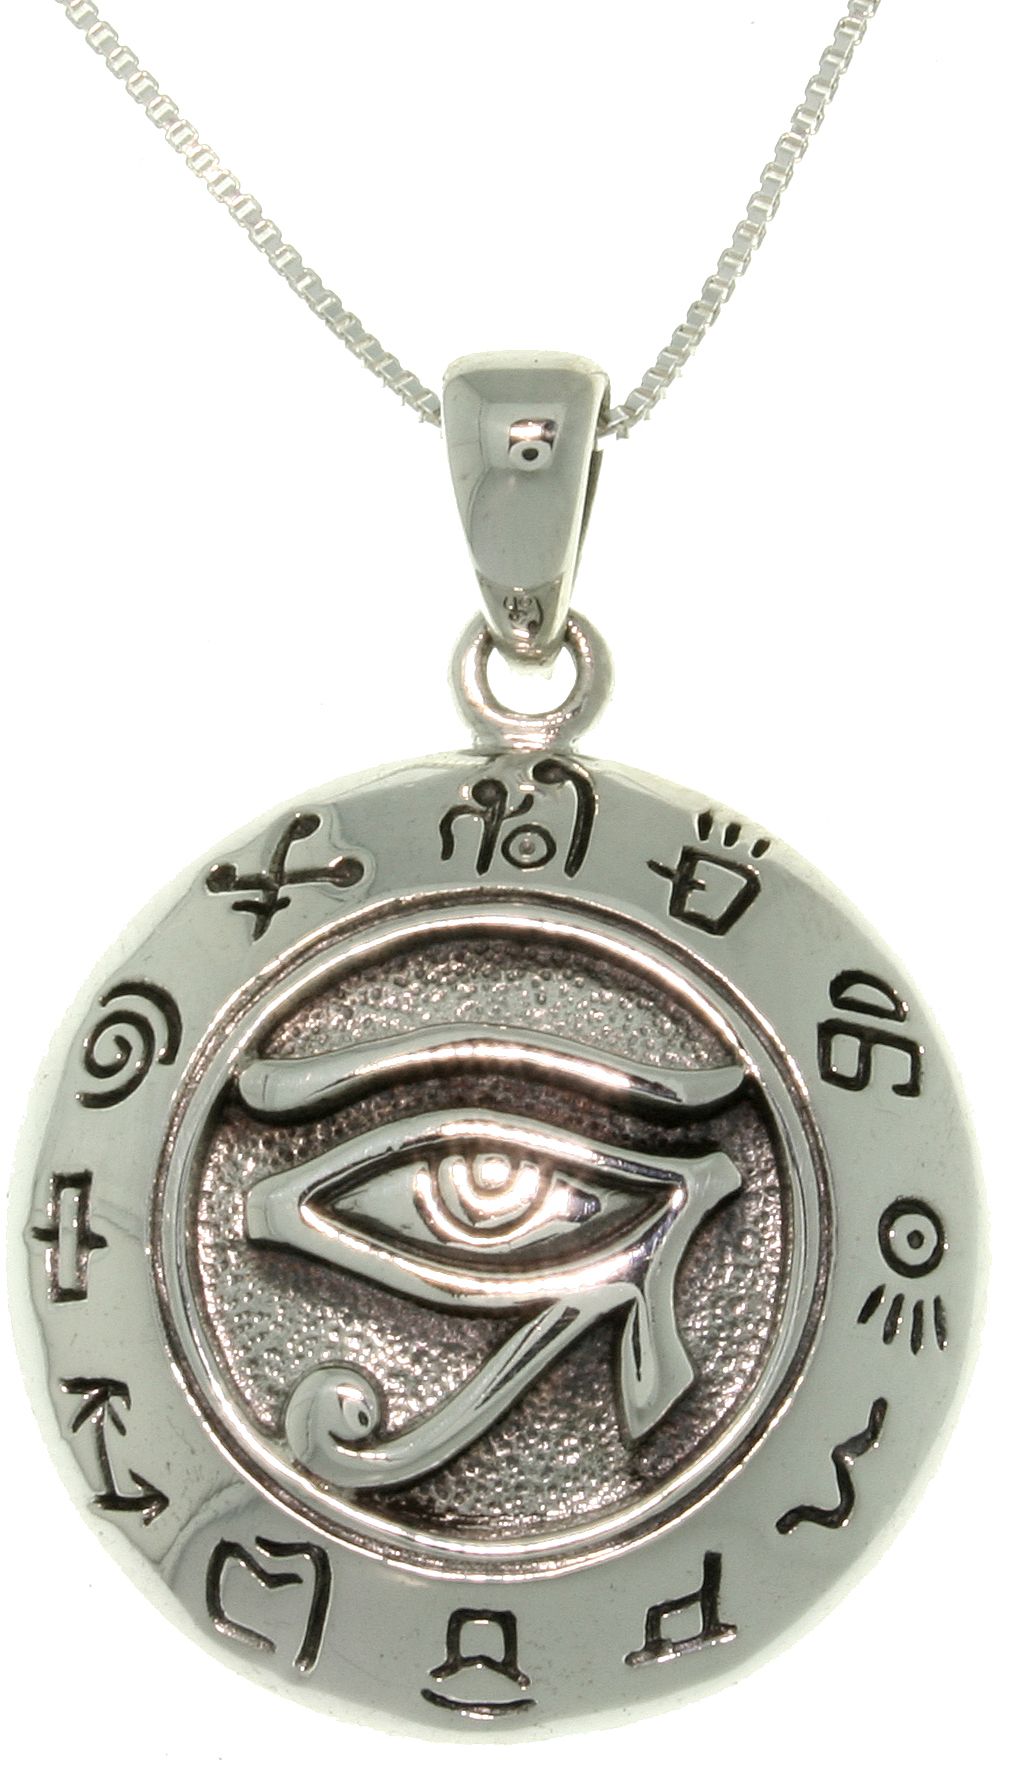 Jewelry Trends Sterling Silver Eye of Horus Egyptian Sun God Symbol Pendant on 18" Silver Necklace